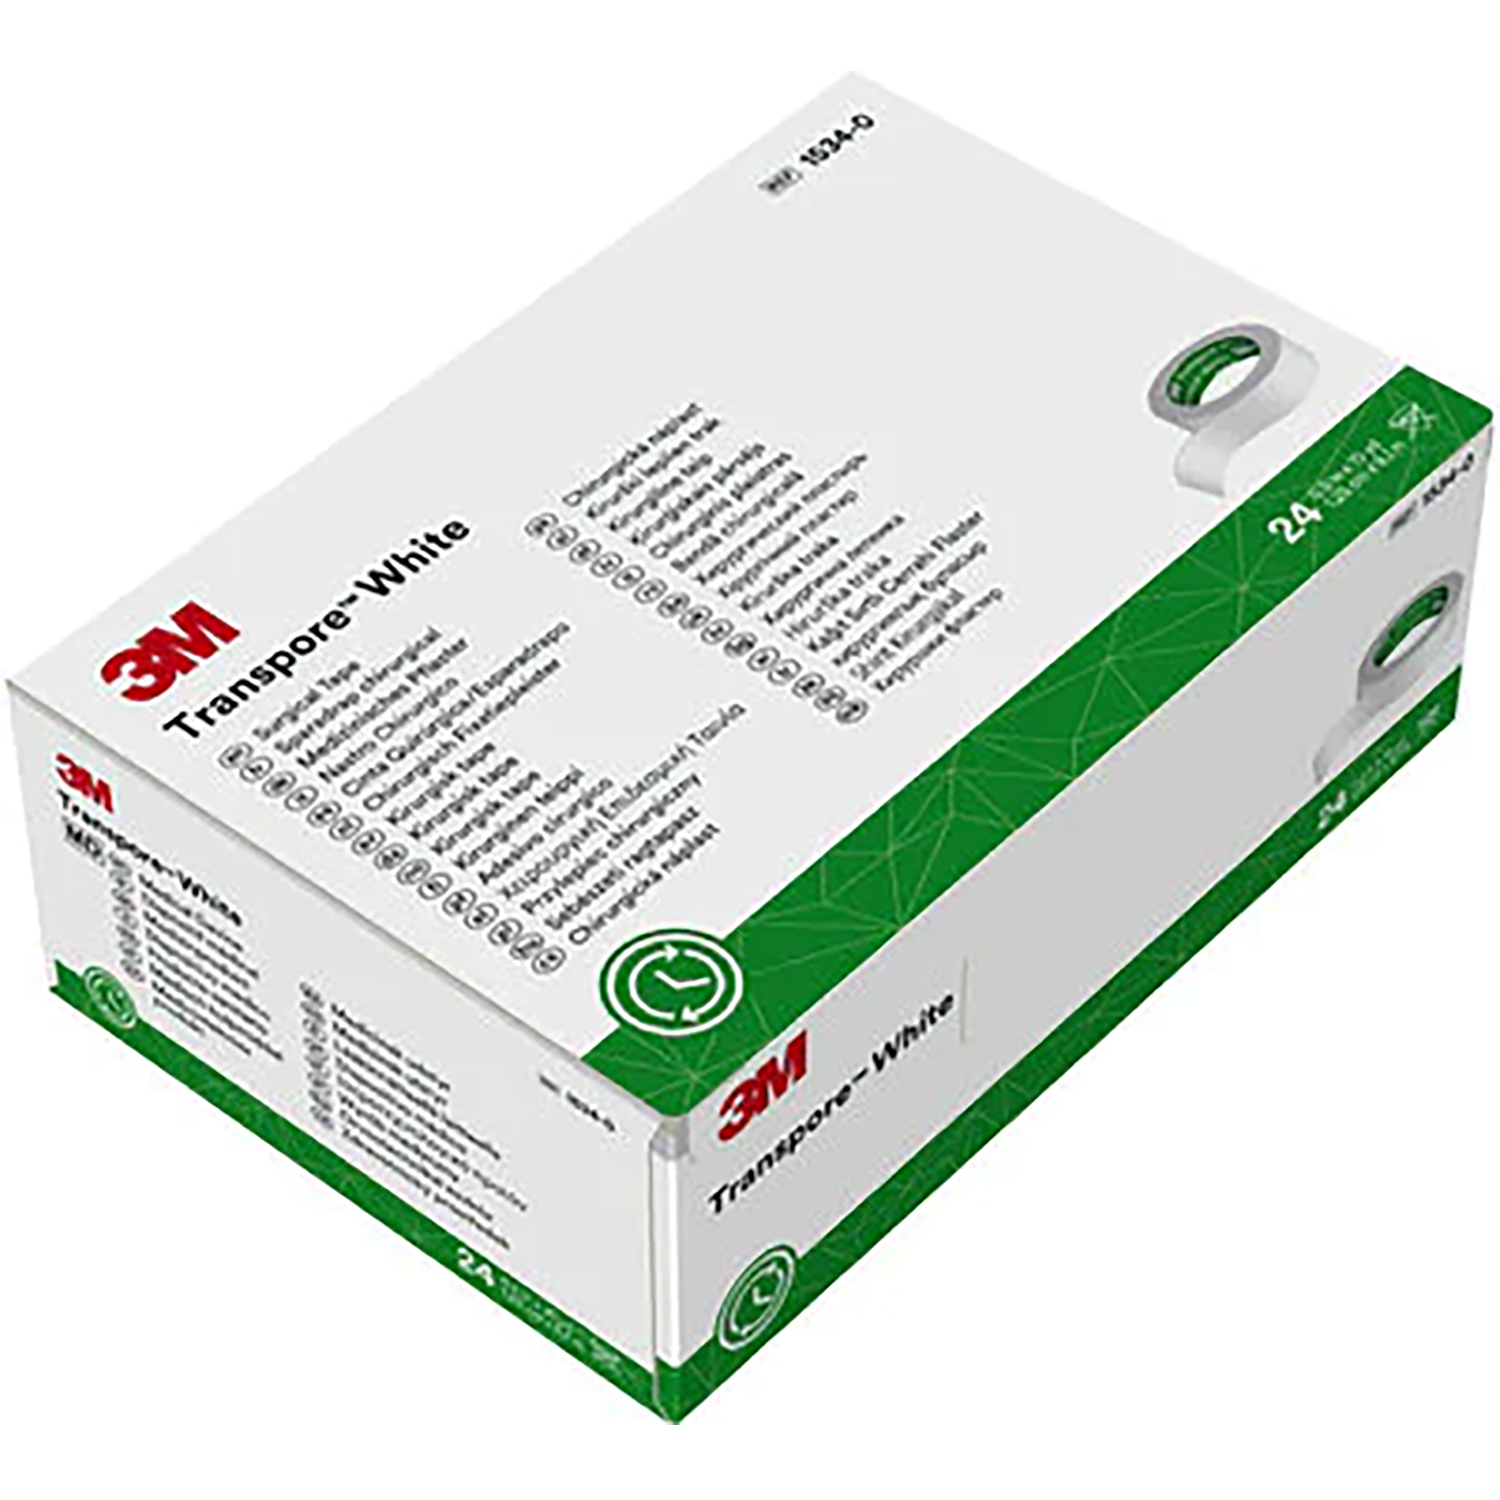 3M Transpore Surgical Tape (White) | 1.25cm x 9.1m | Pack of 24 Rolls